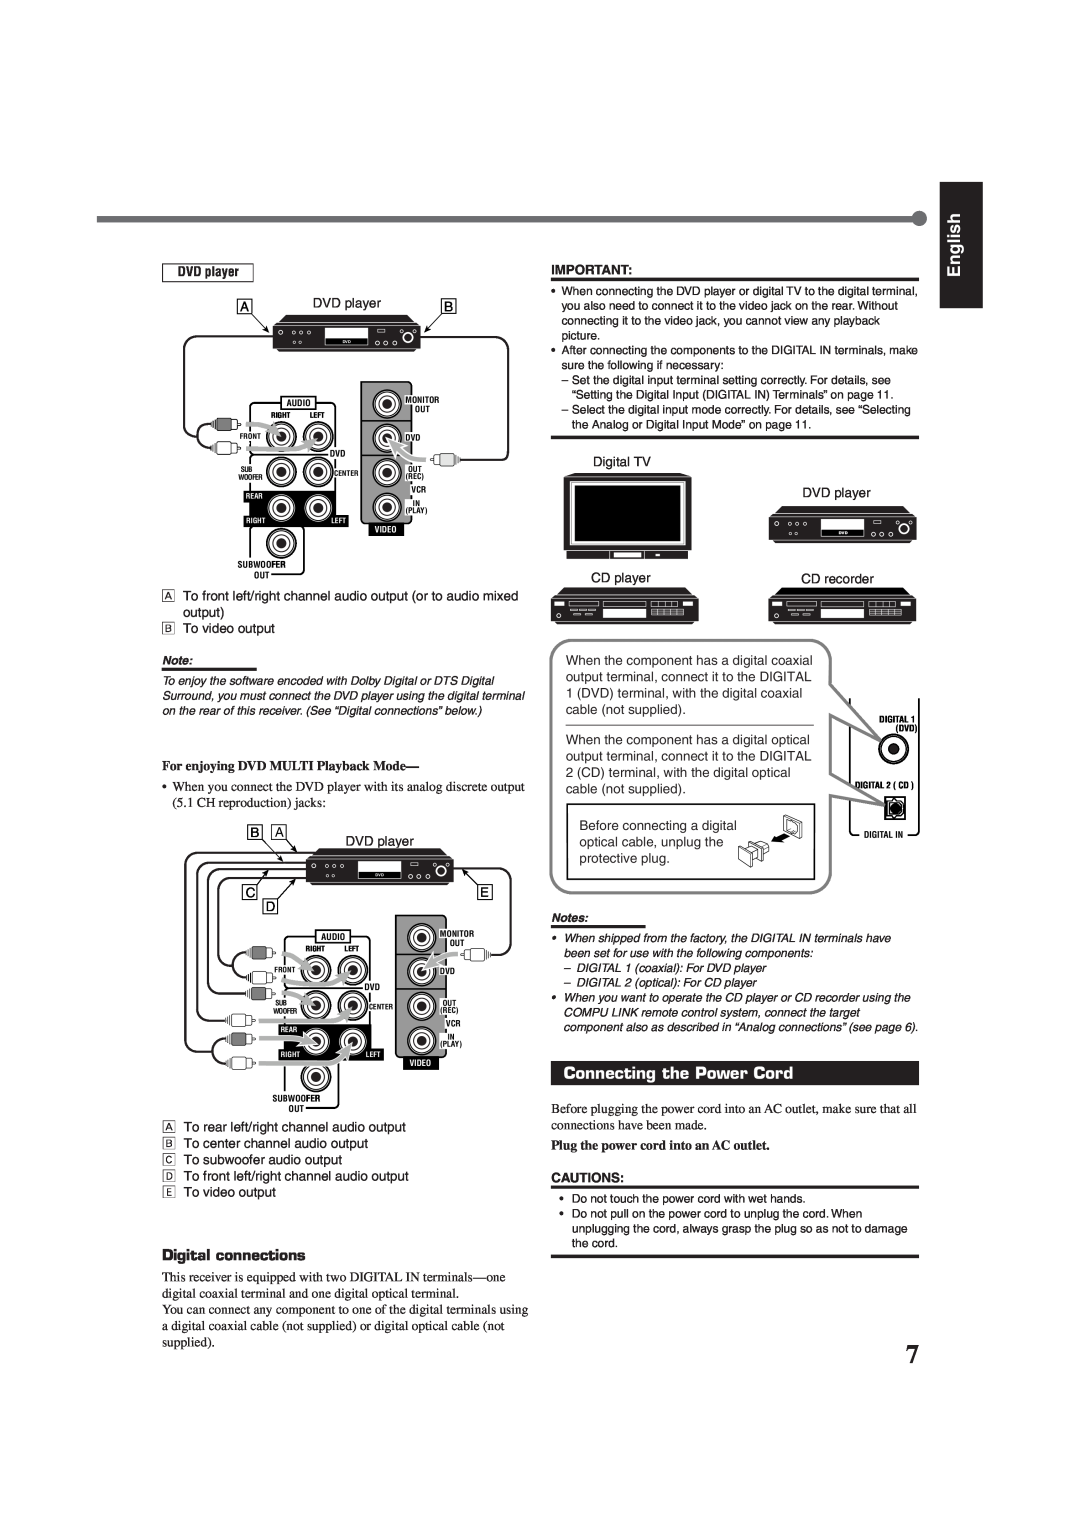 JVC RX-6020VBK manual Connecting the Power Cord, English, Digital connections 